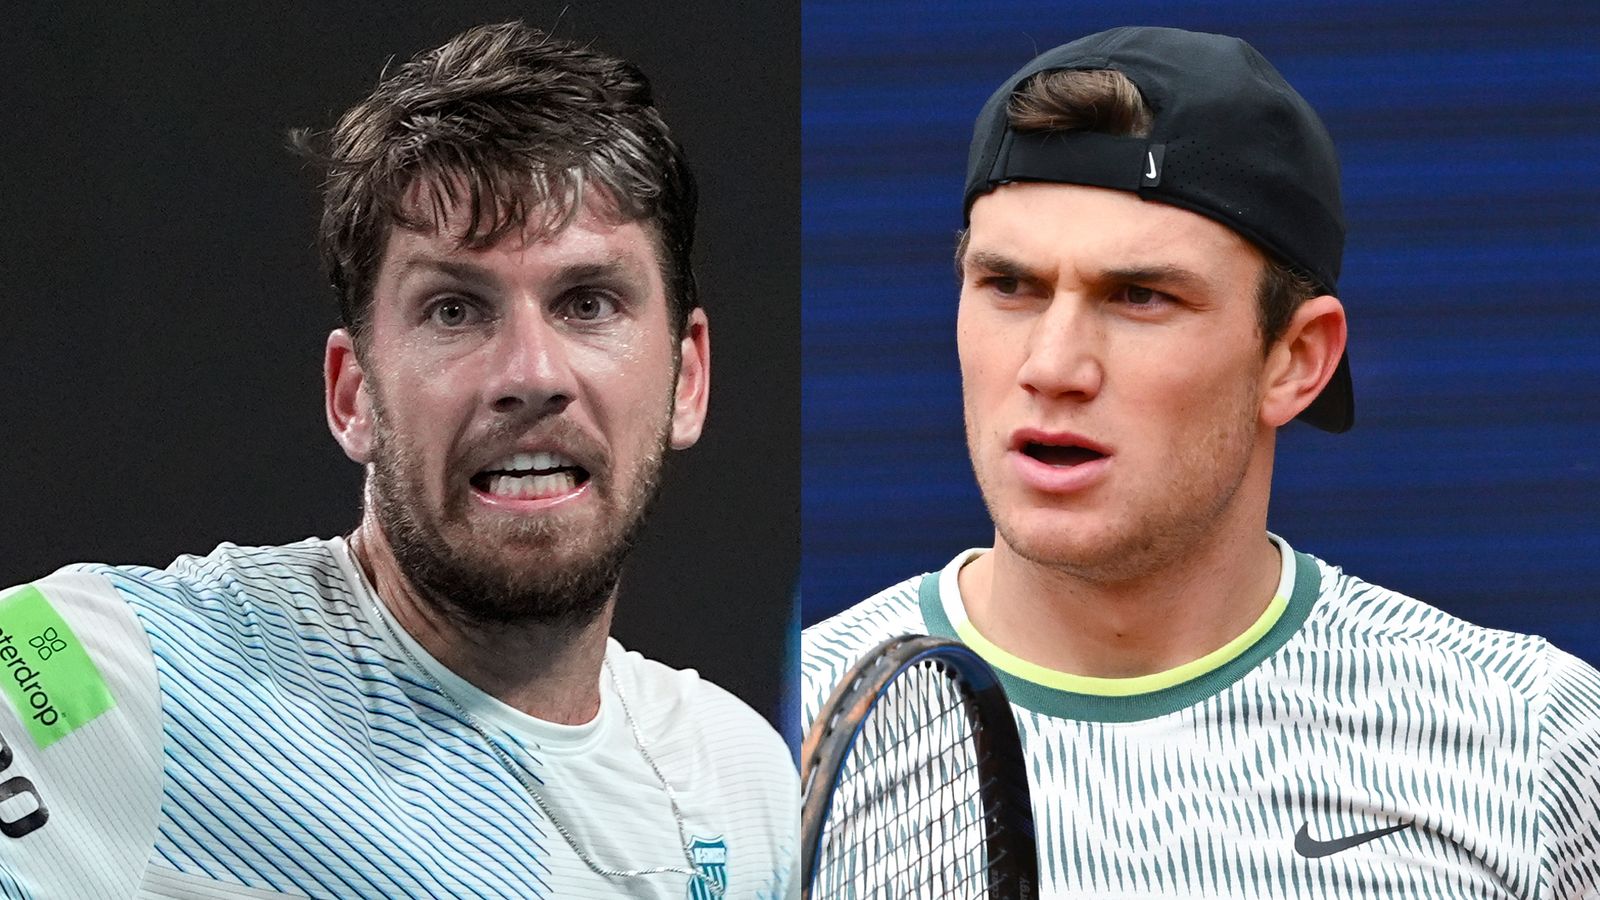 Cameron Norrie and Jack Draper suffer quarter-final exits on clay in Barcelona and Munich | Tennis News | Sky Sports